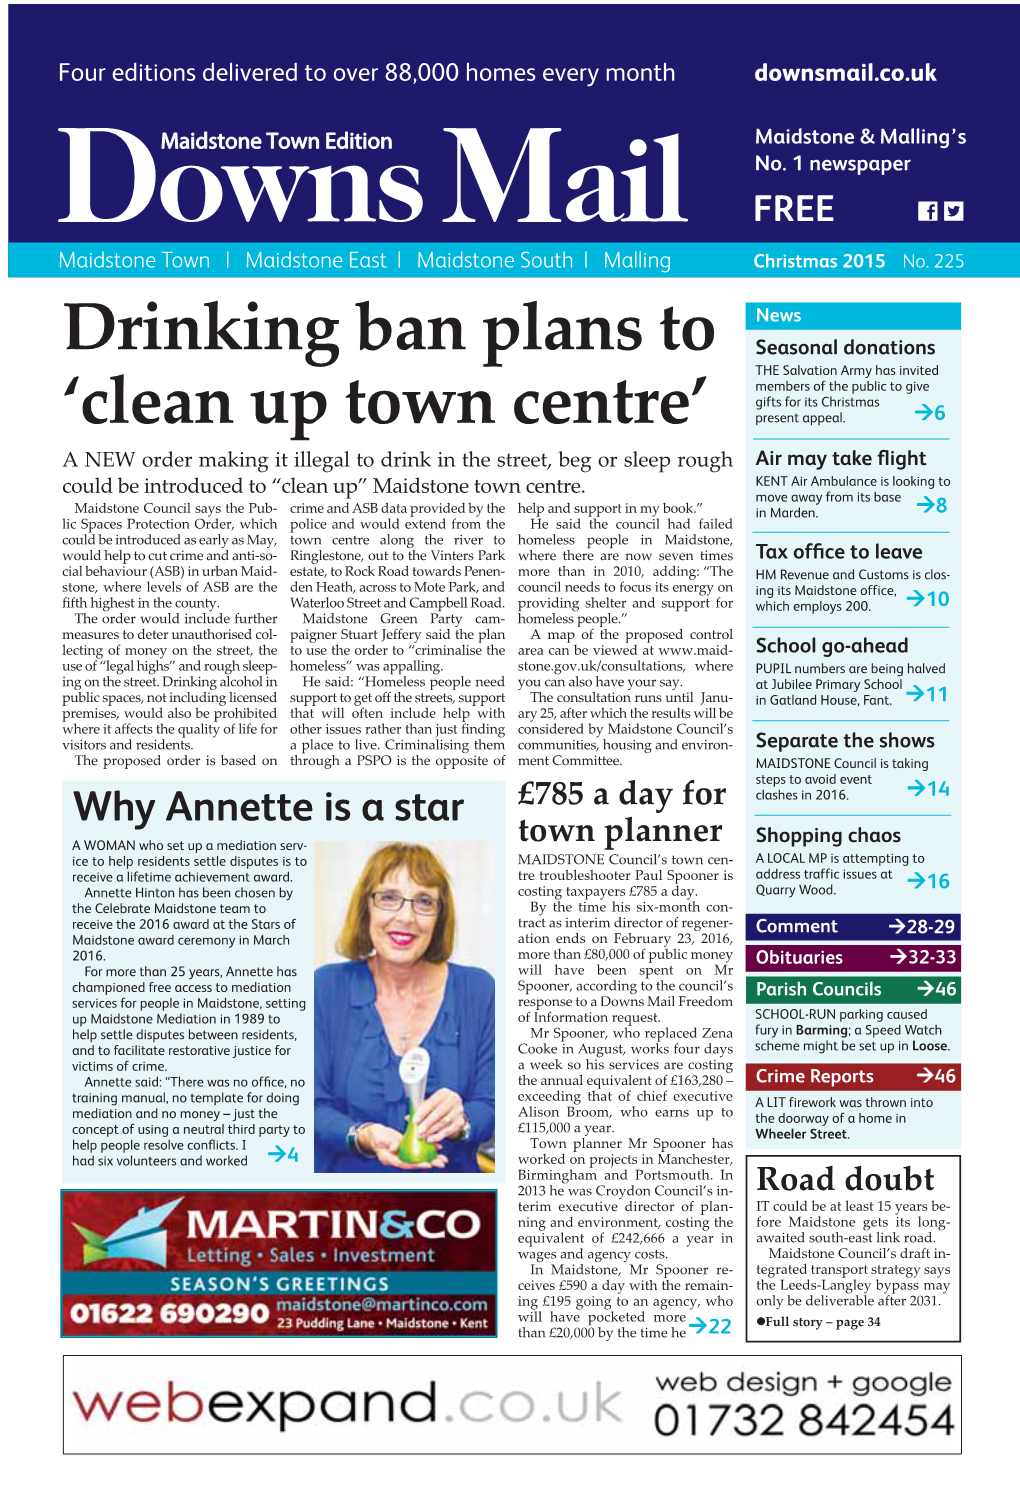 Drinking Ban Plans to 'Clean up Town Centre'